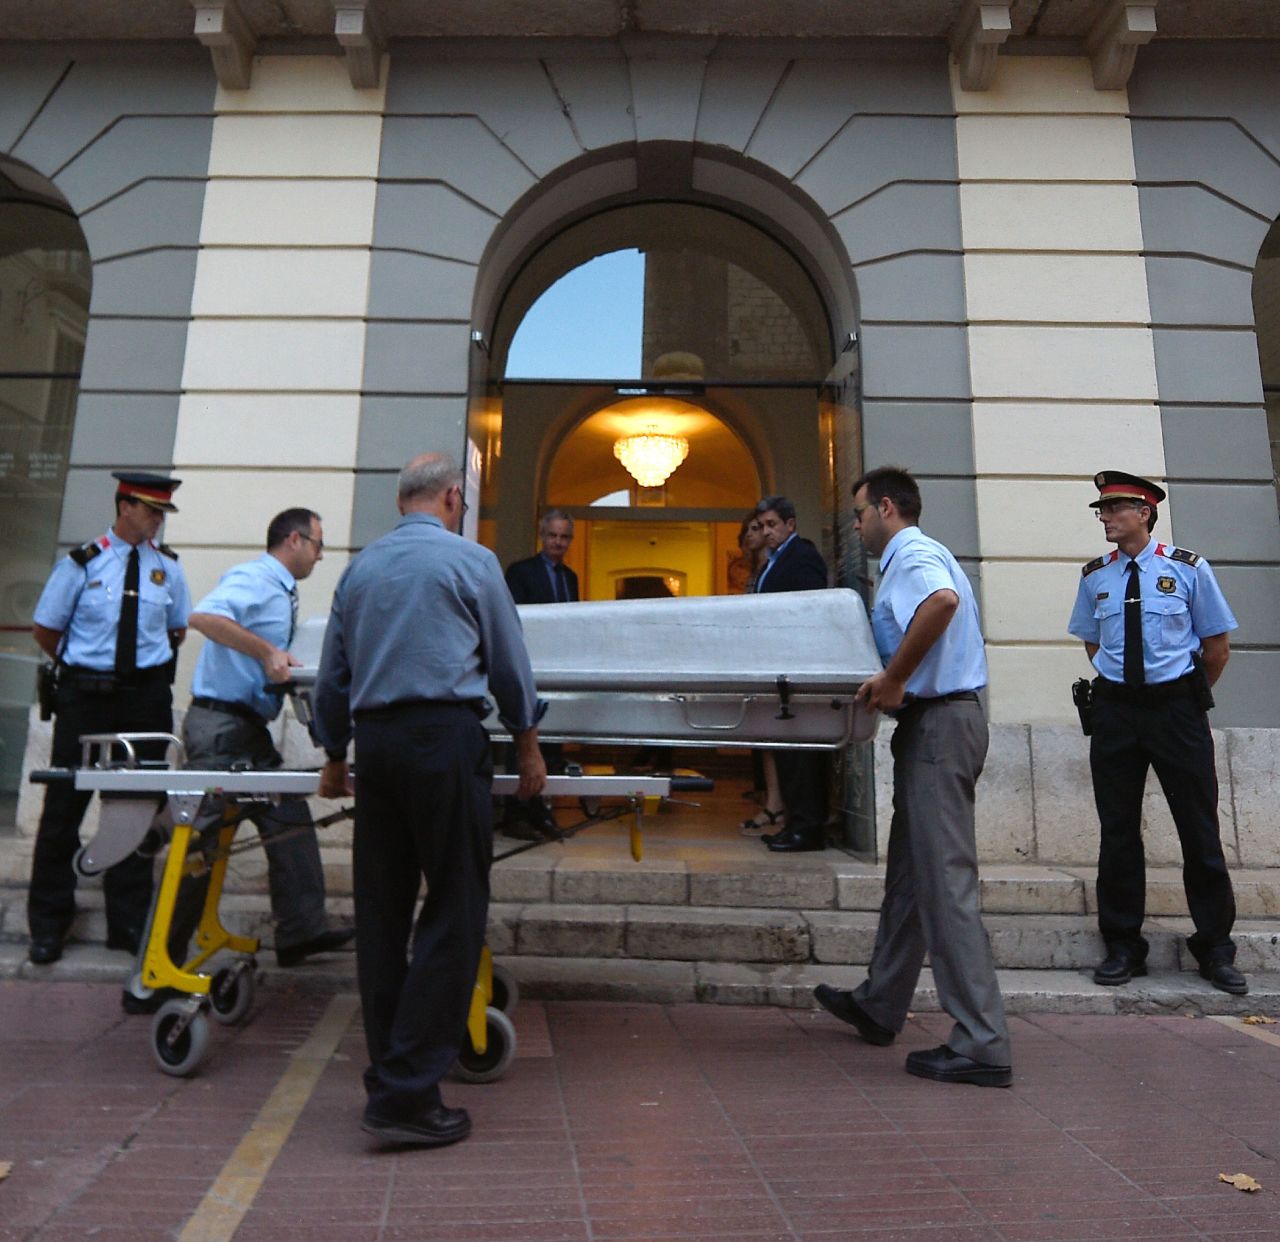 A casket is taken inside the Teatre-Museu Dali (Theatre-Museum Dali) with forensic examiners for the exhumation of Salvador Dali's remains in Figueras on July 20, 2017.